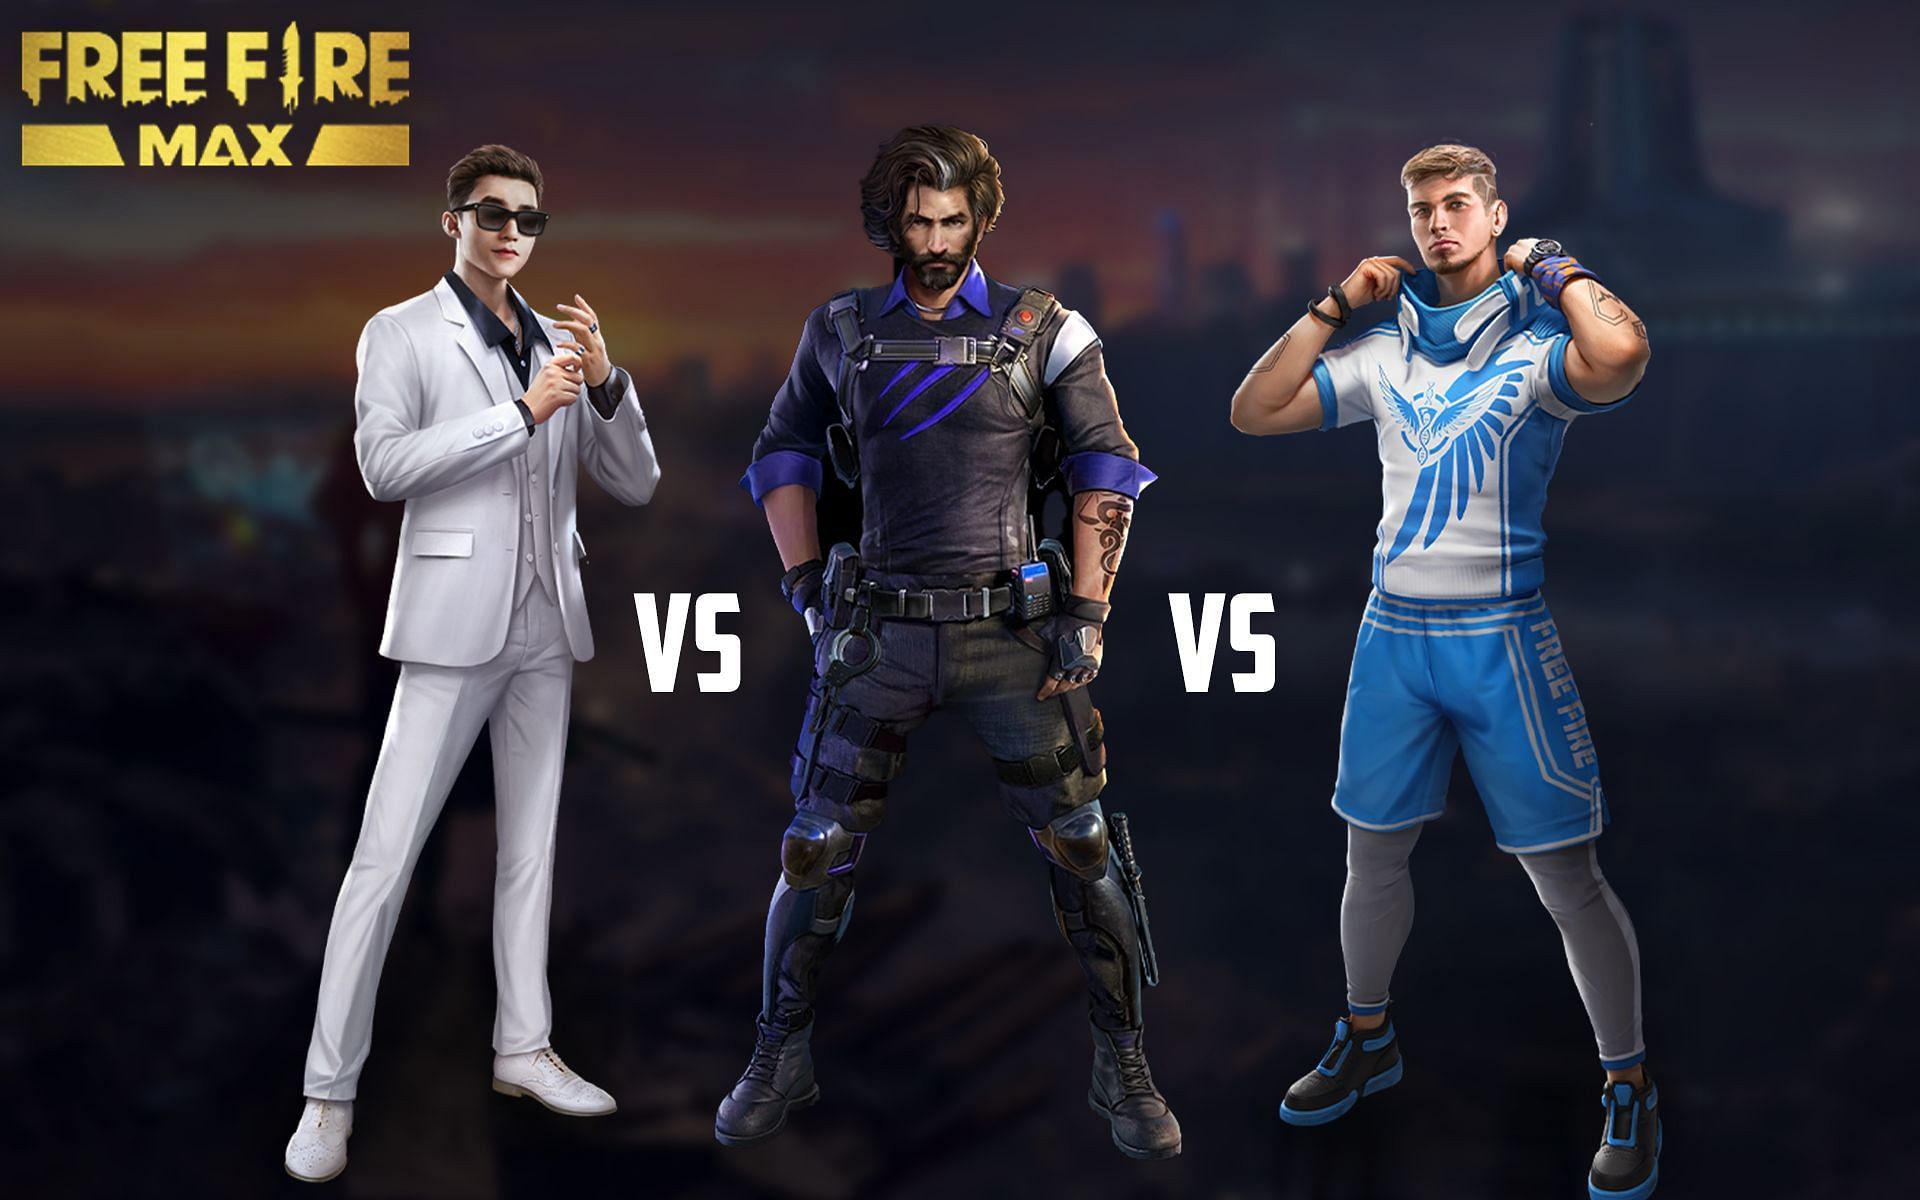 Make rank push easier by using these characters in Free Fire MAX (Image via Sportskeeda)